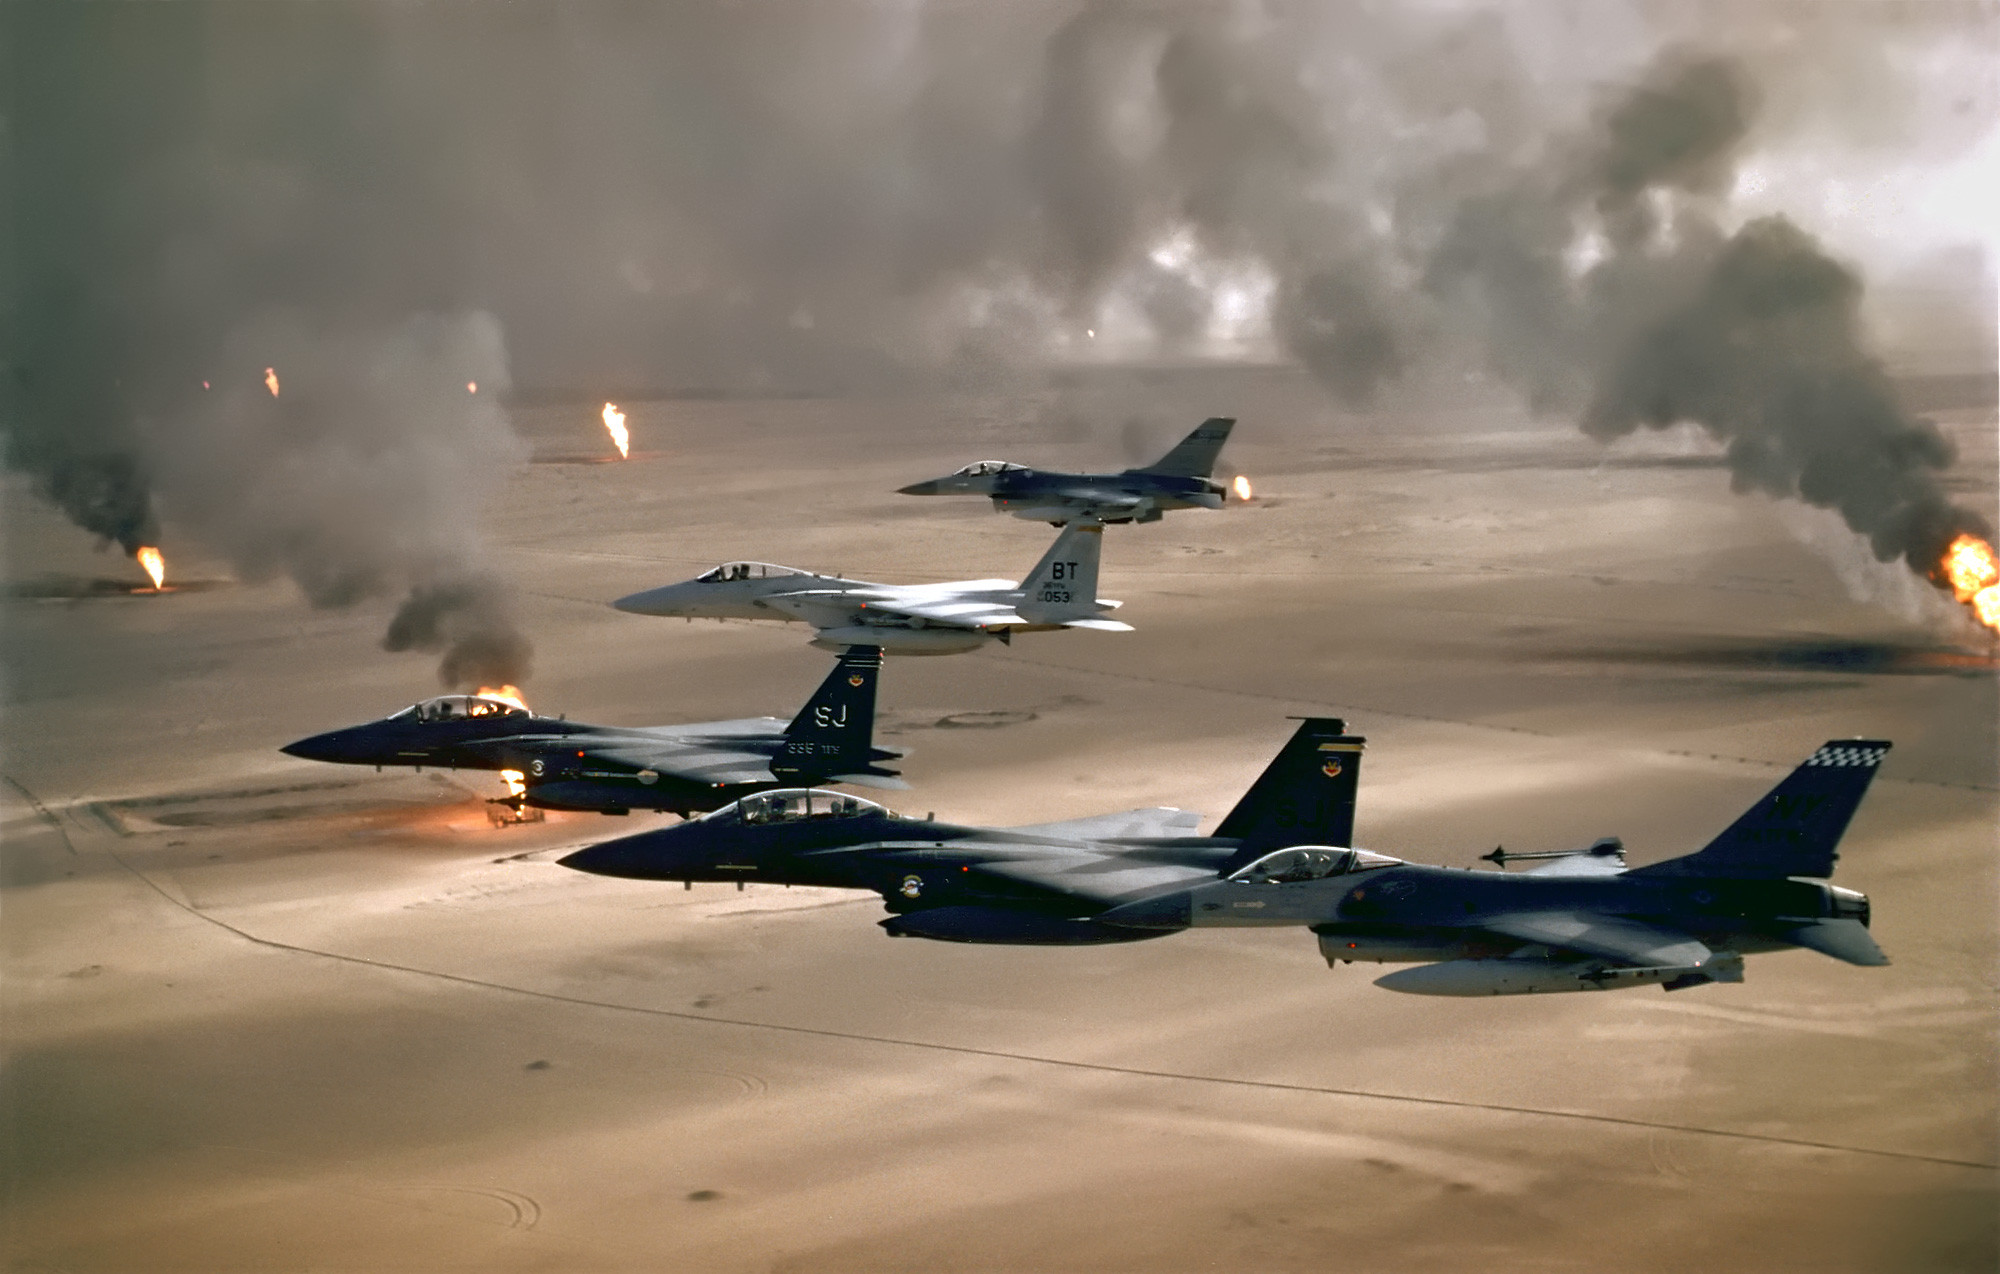 USAF aircraft fly over burning Kuwaiti oil wells, 1991